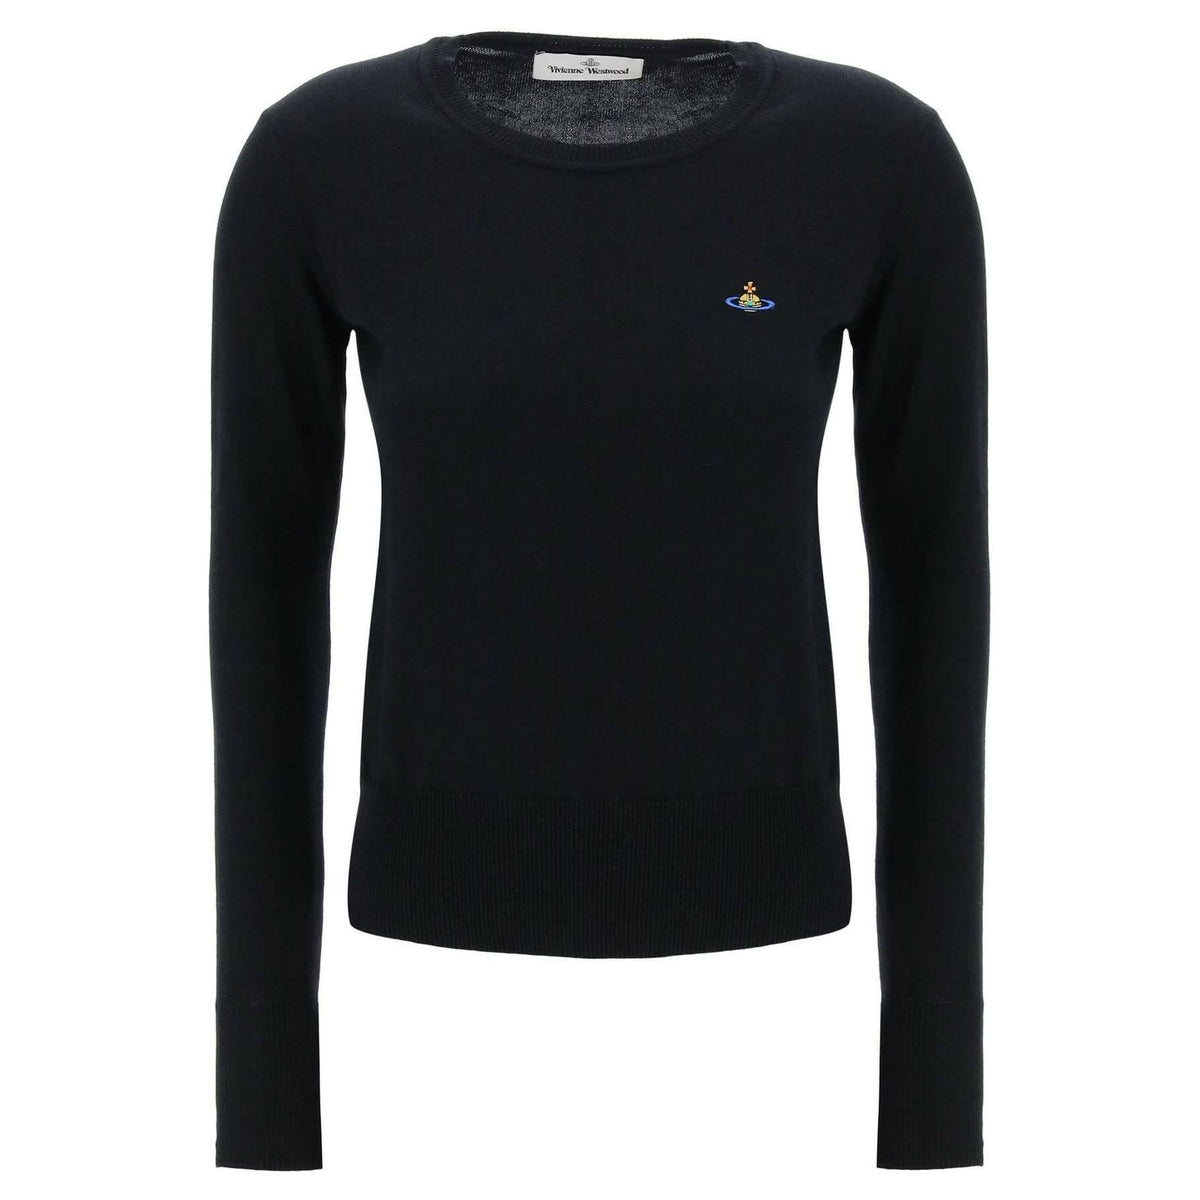 VIVIENNE WESTWOOD - Black Cotton Crew-Neck Pullover With Embroidered Logo - JOHN JULIA